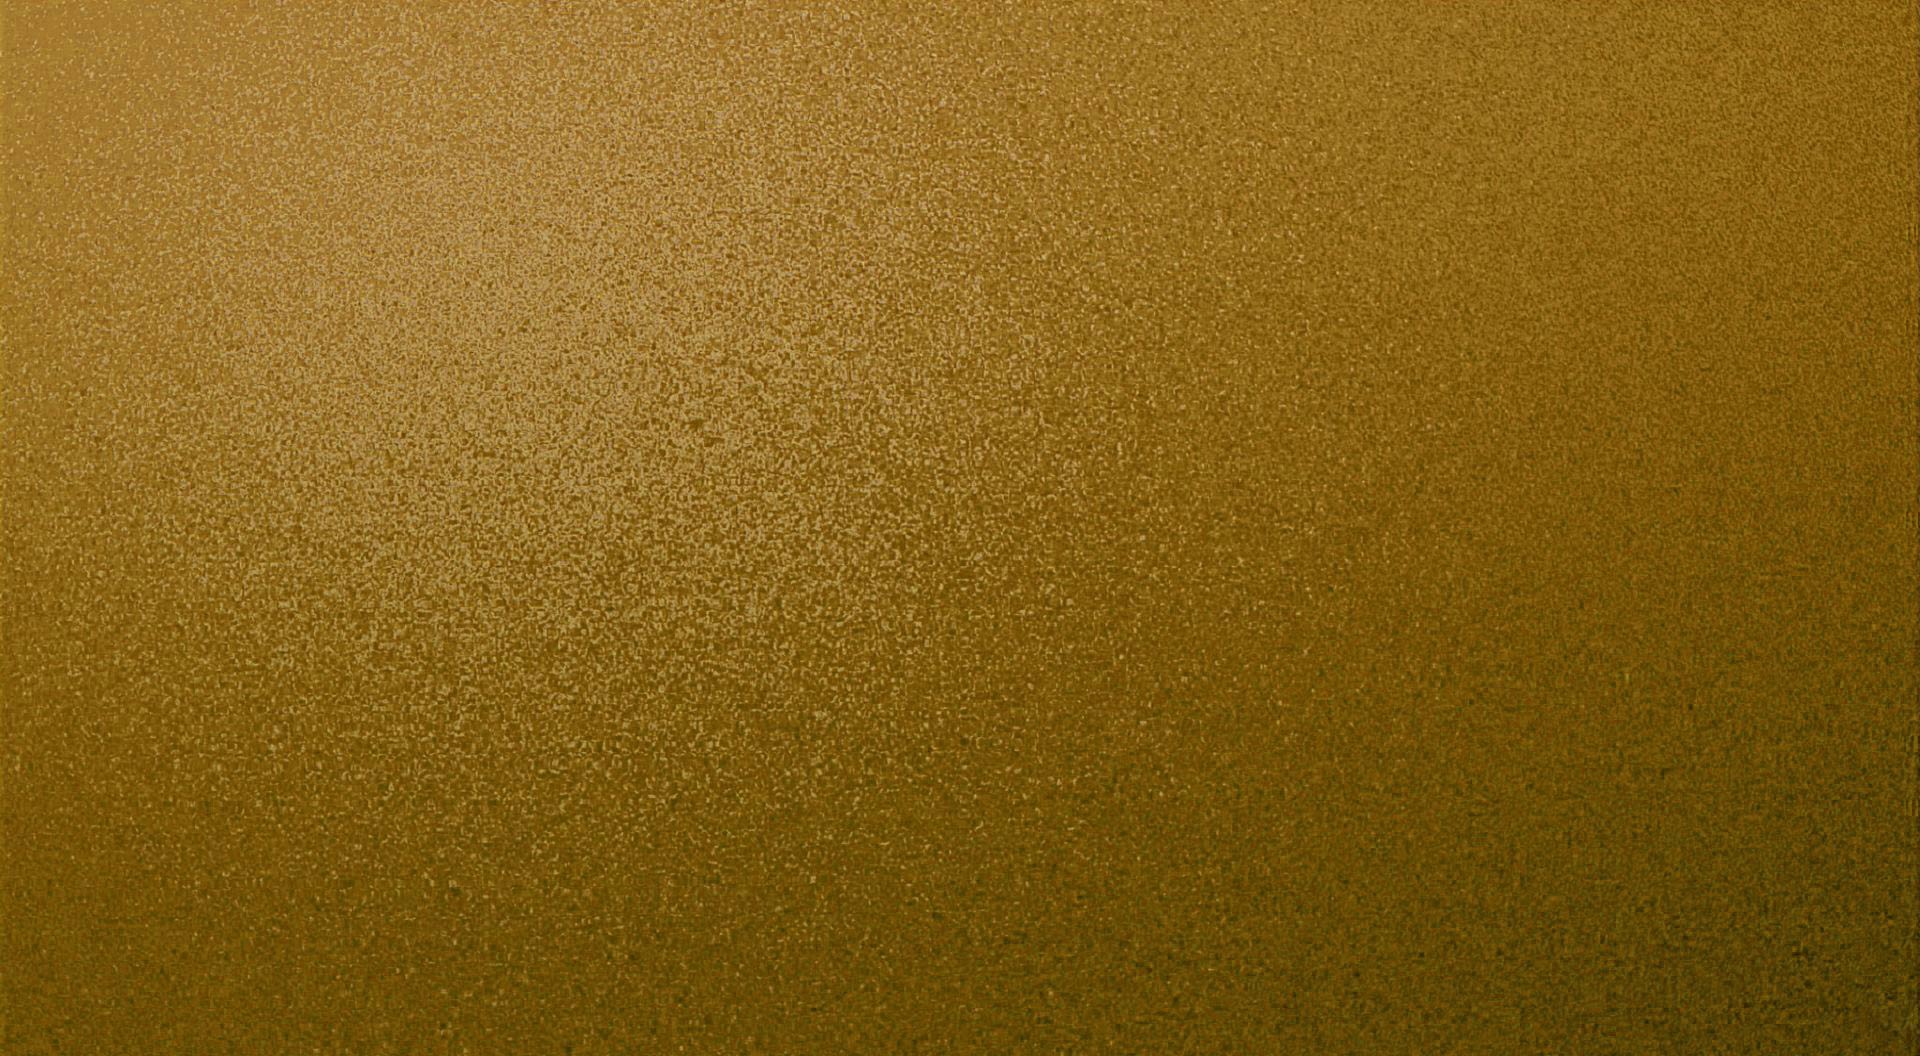 Gold Yellow Textured Speckled Desktop Background Wallpaper For Use